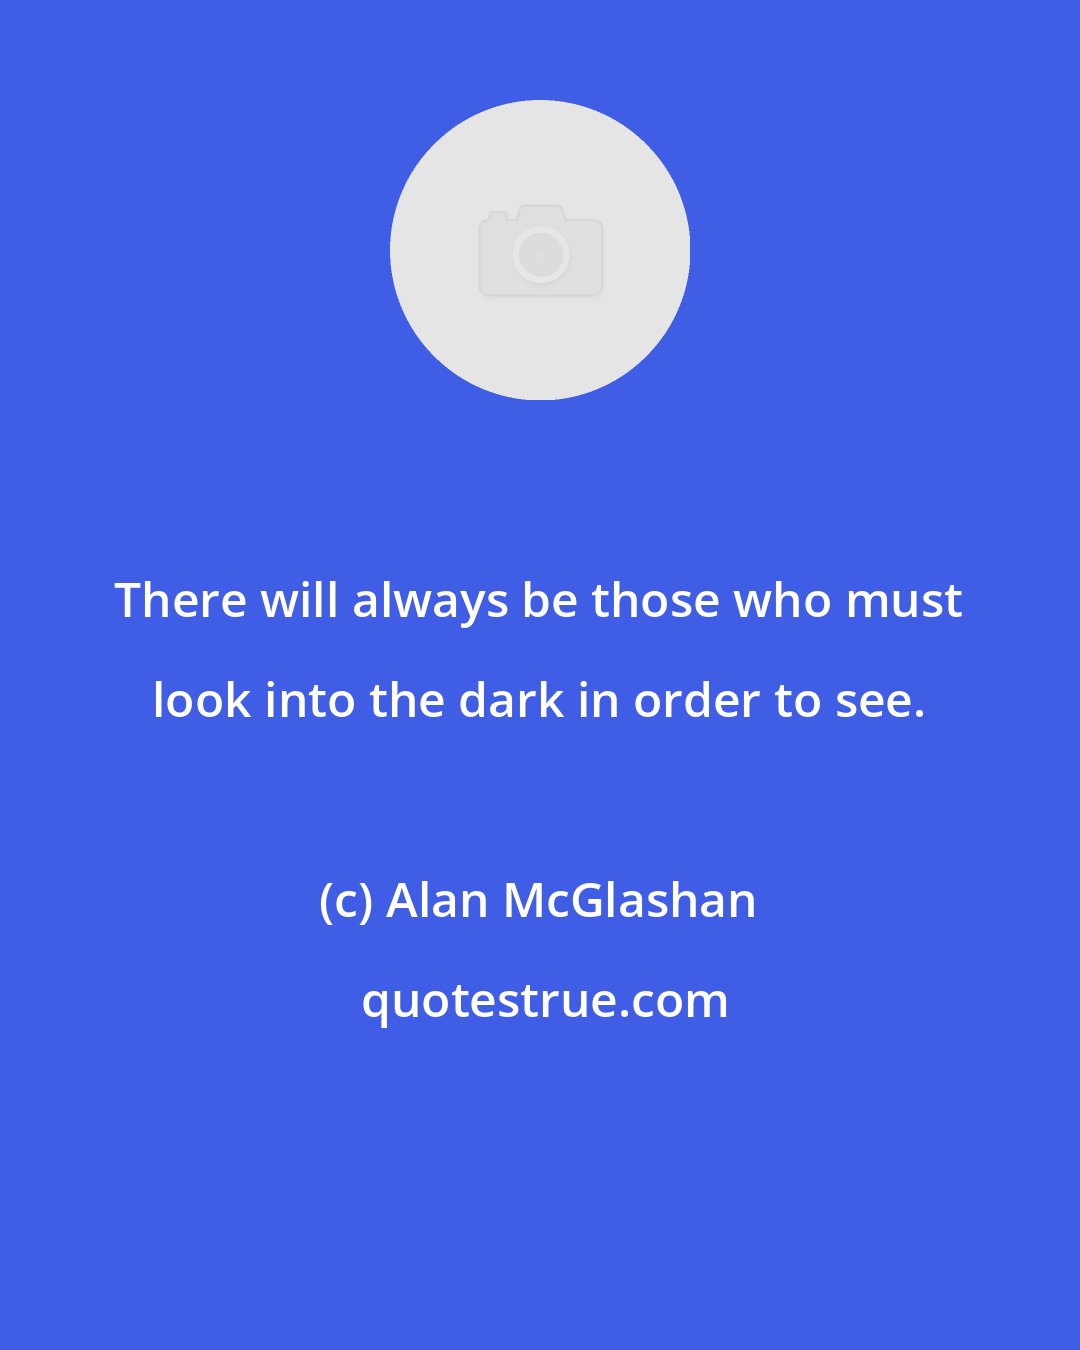 Alan McGlashan: There will always be those who must look into the dark in order to see.